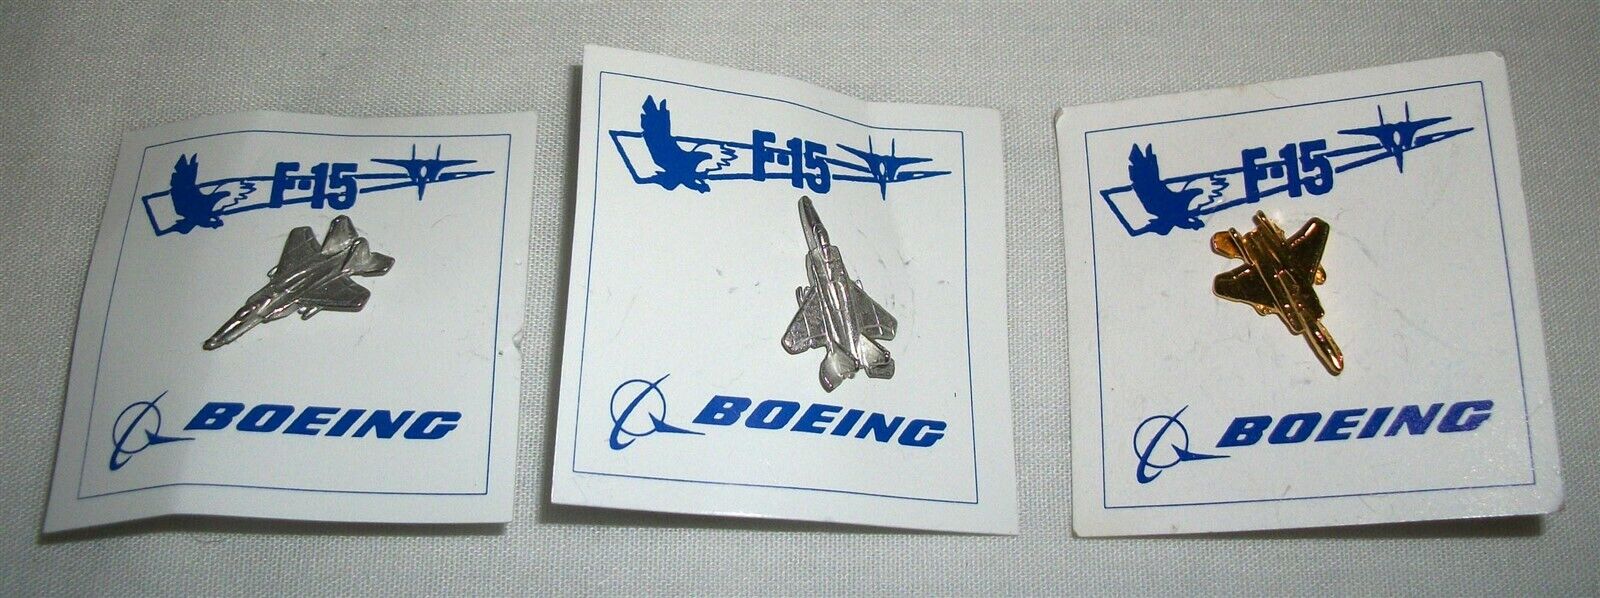 Vintage Boeing F-15 Fighter Aircraft Jet Lapel Pin Tie Tack Lot Some Damaged